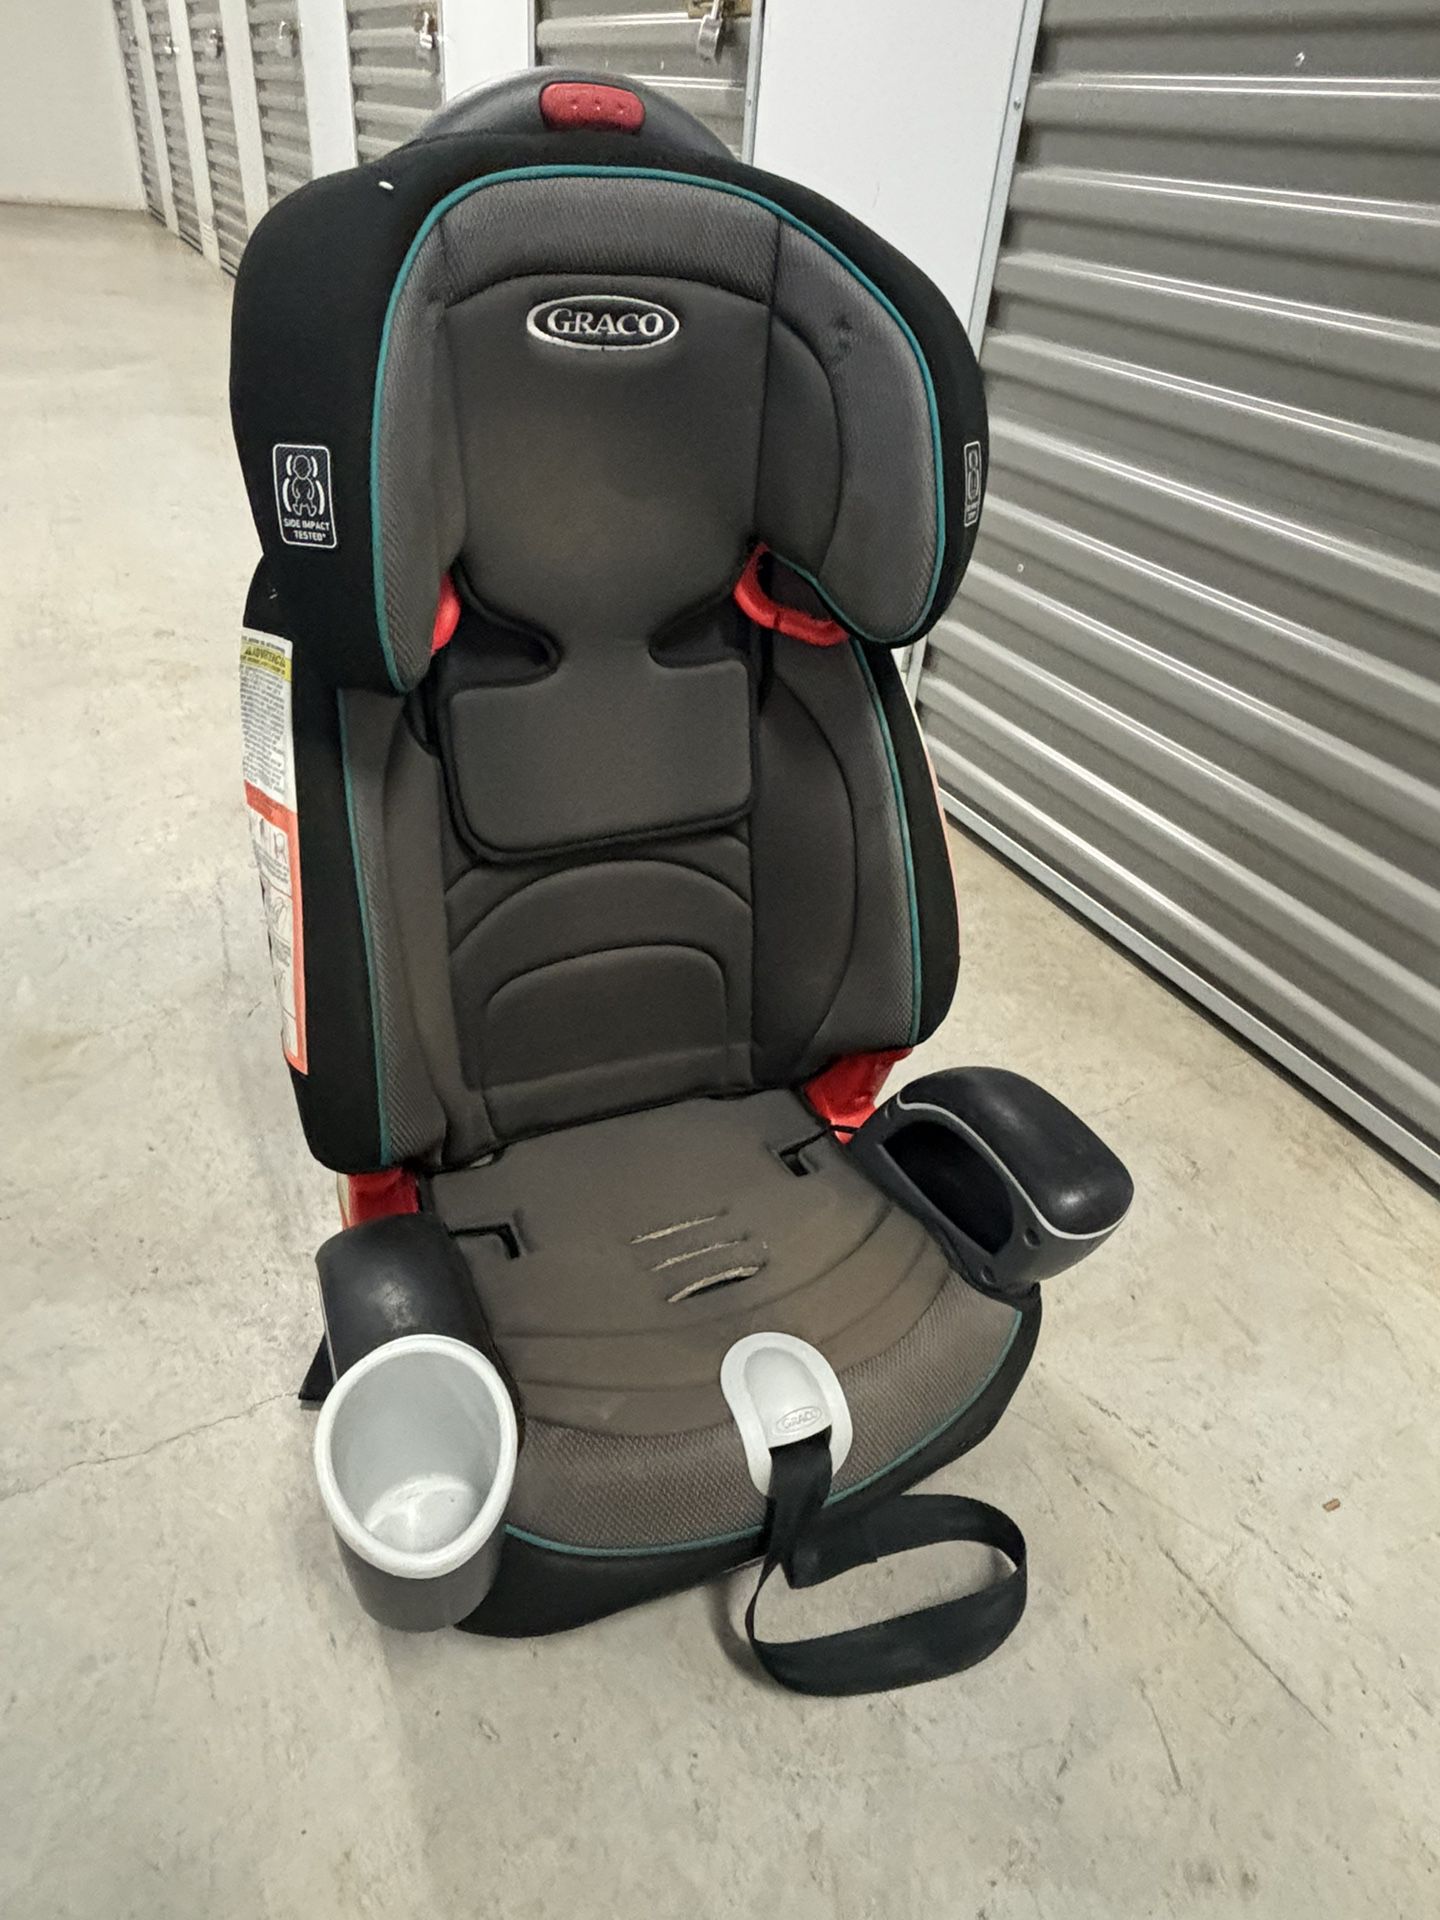 Graco Nautilus 65 3-in-1 Harness Booster Seat